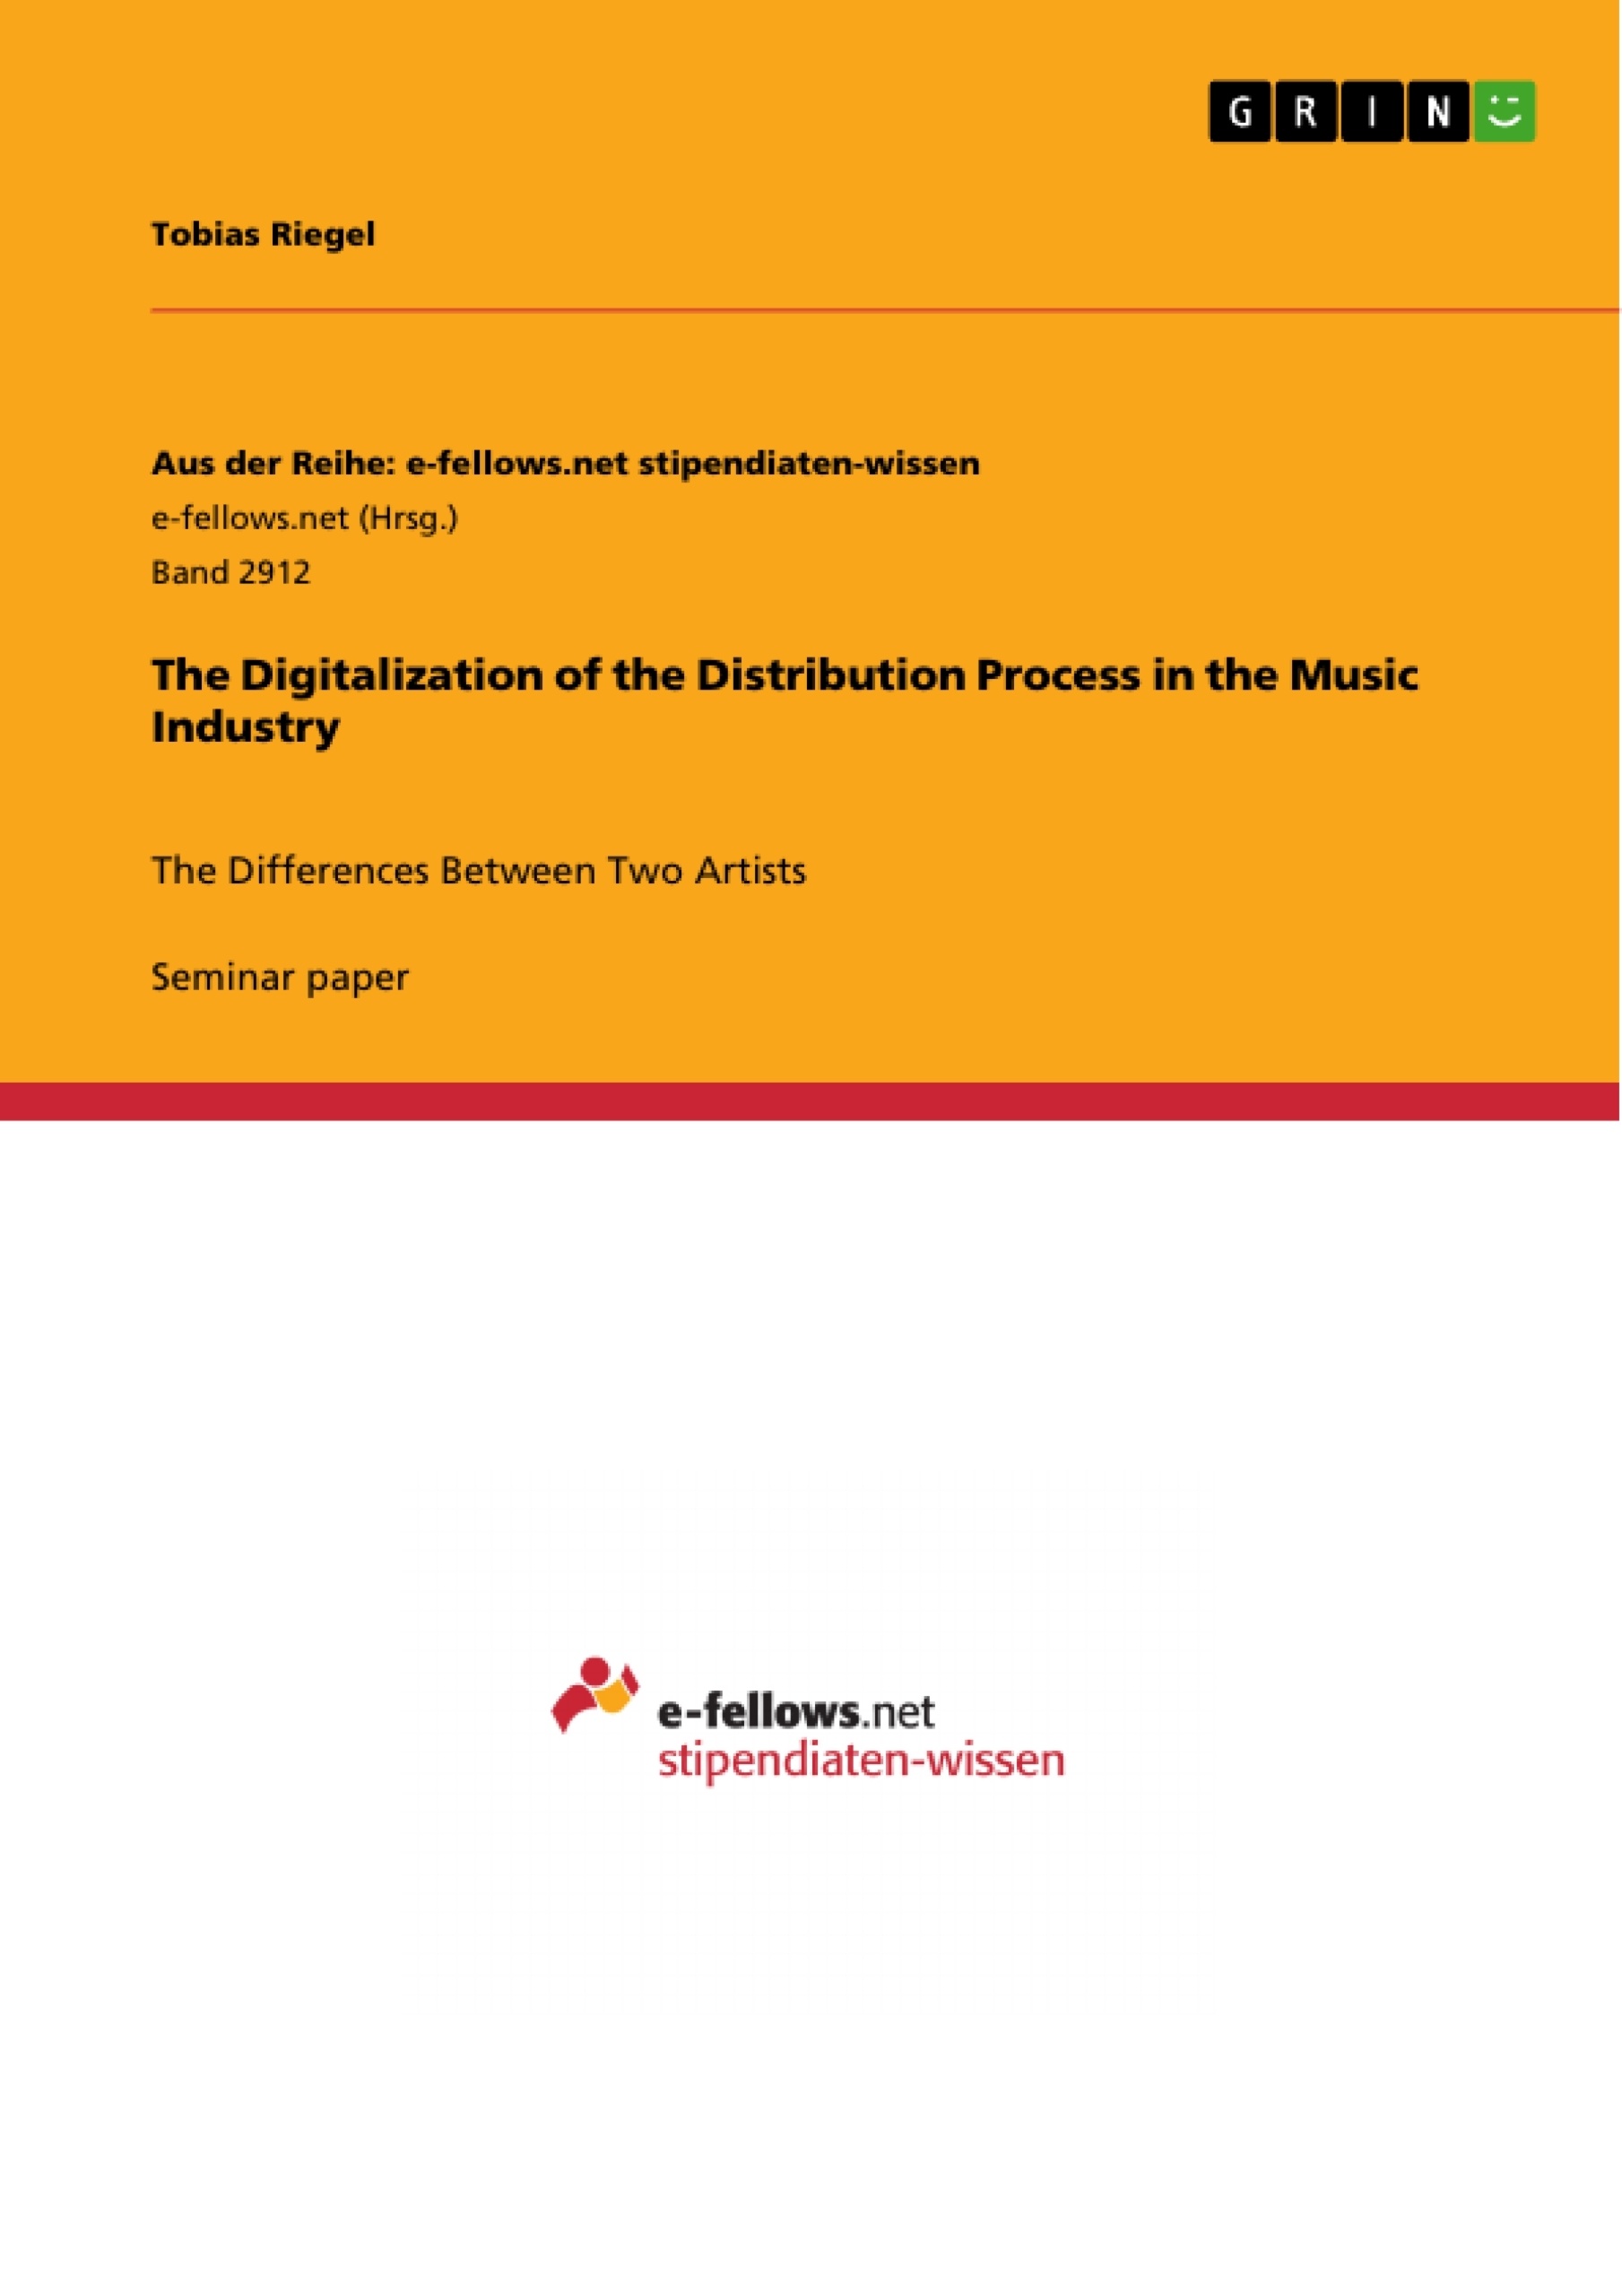 Título: The Digitalization of the Distribution Process in the Music Industry